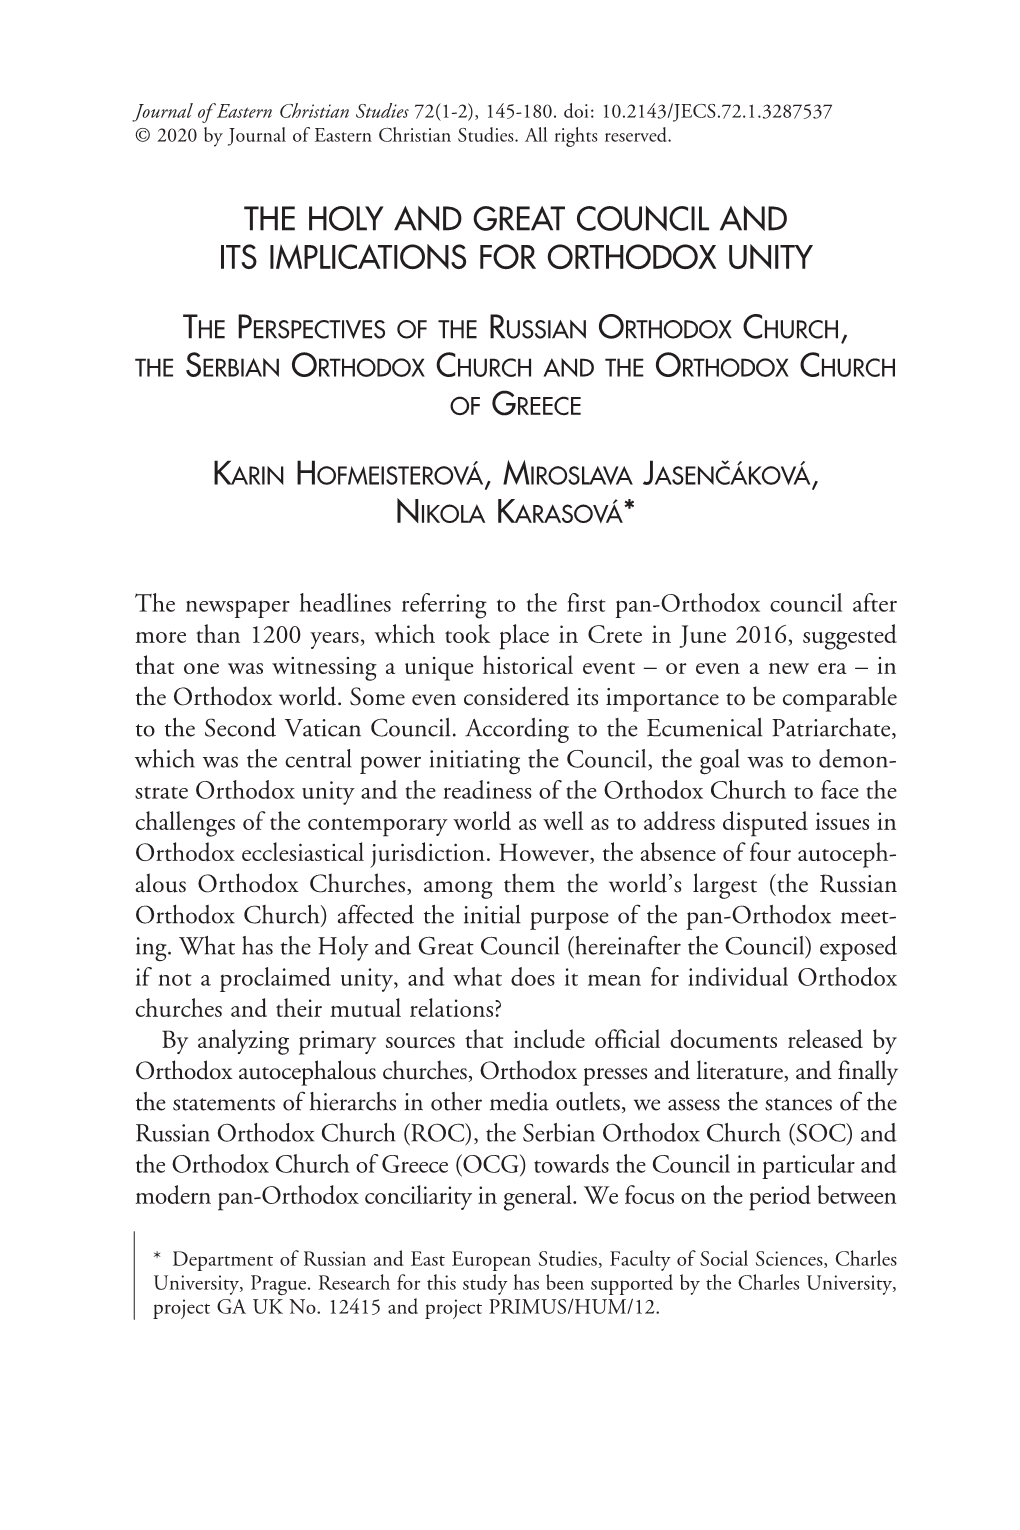 The Holy and Great Council and Its Implications for Orthodox Unity